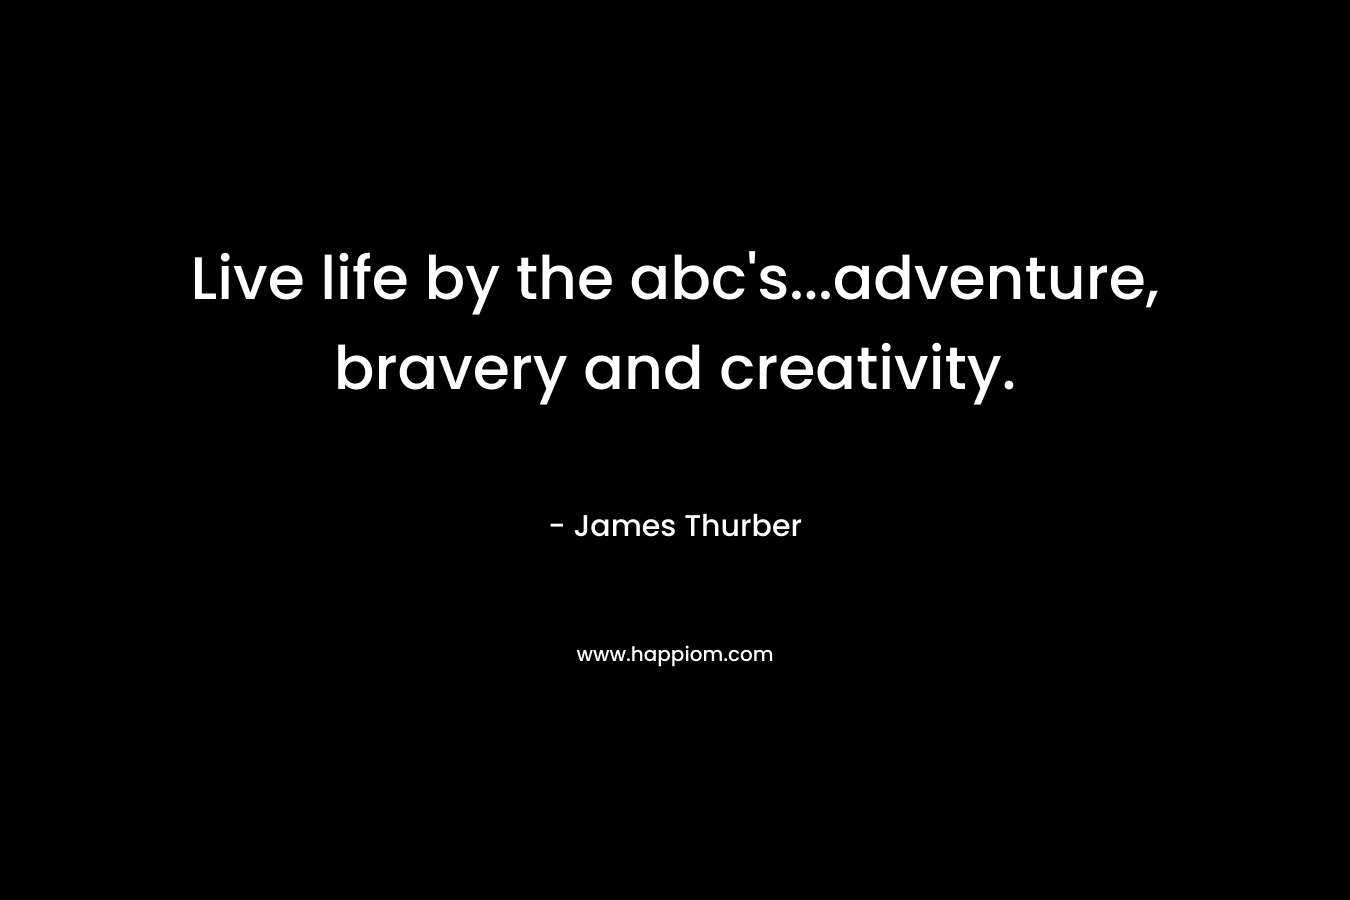 Live life by the abc's...adventure, bravery and creativity.